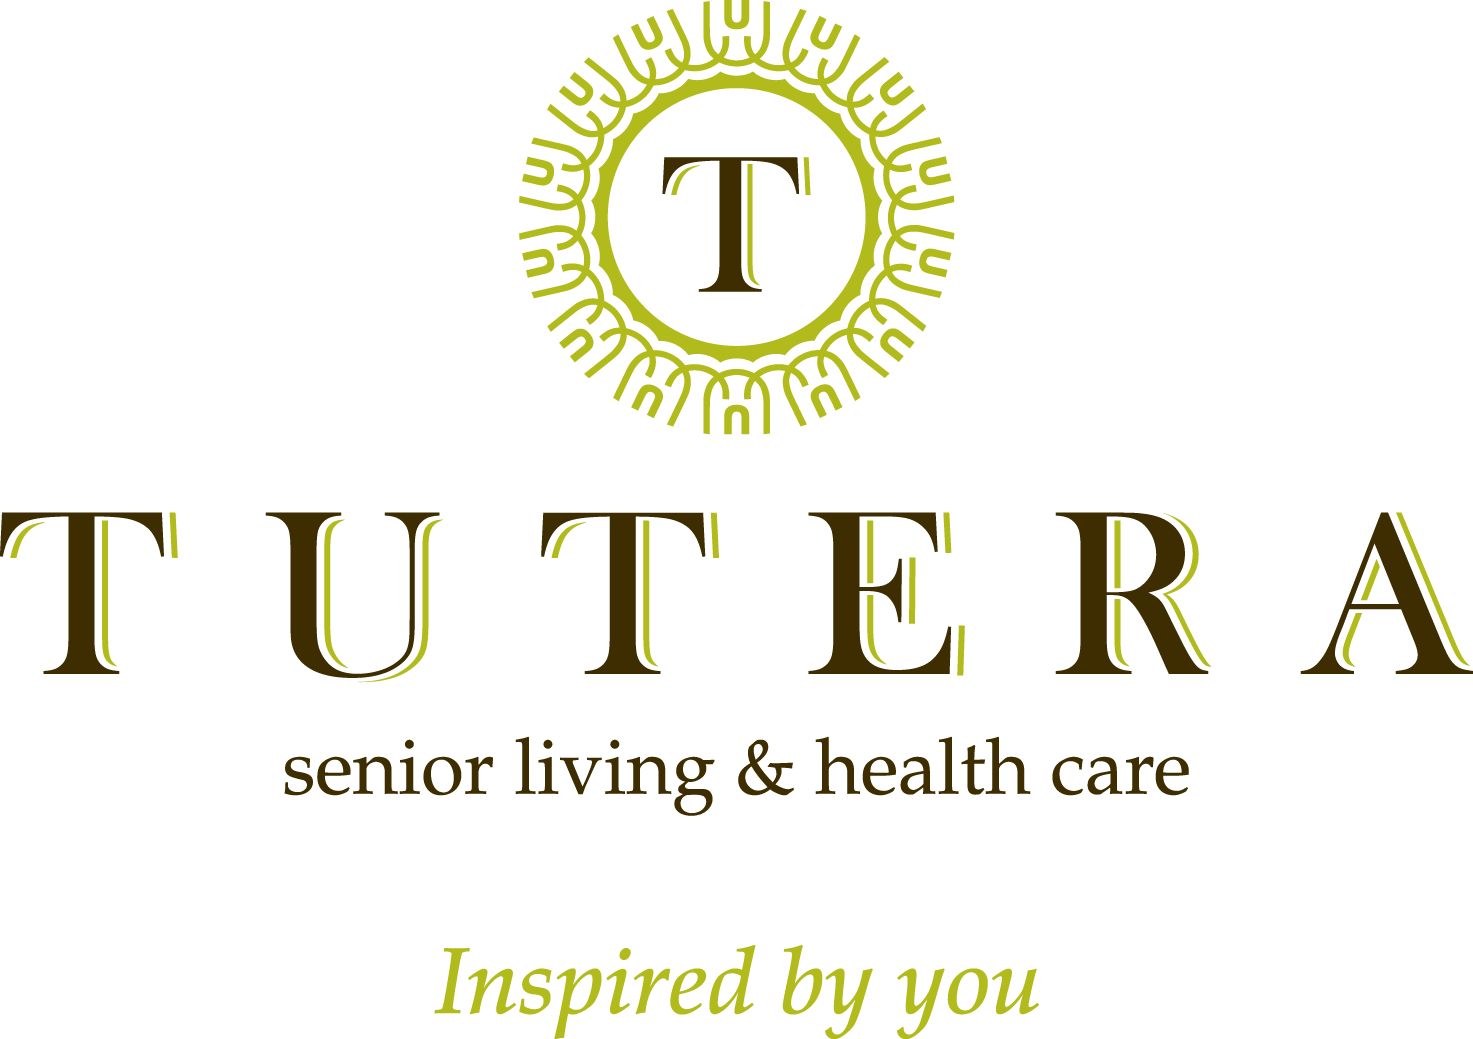 Tutera is committed to making a positive difference in the lives of its residents & their families through senior living & health care experts who inspire & promote individuality & personal happiness.